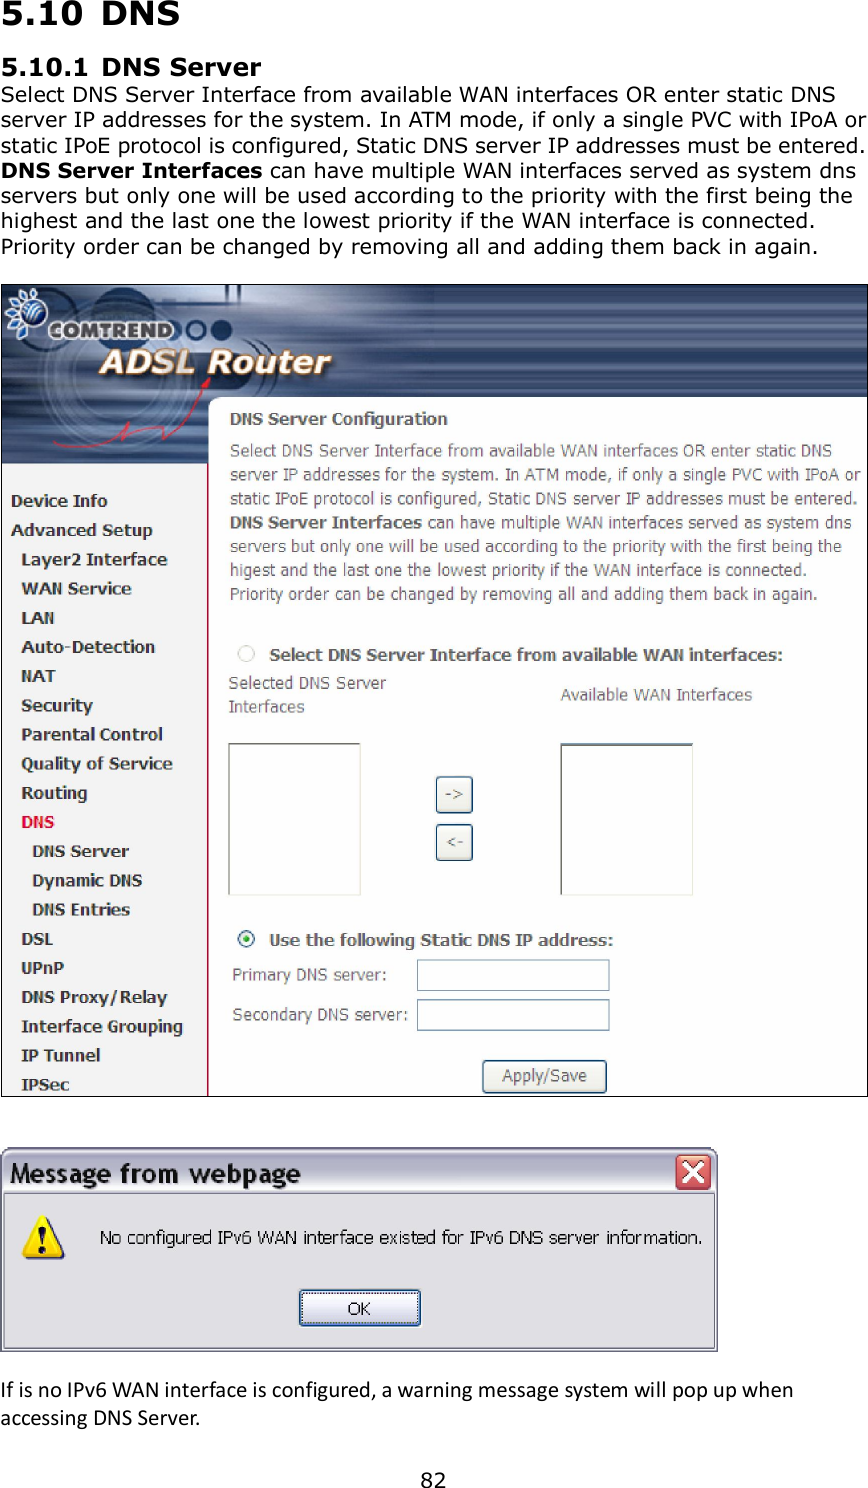  82 5.10  DNS 5.10.1 DNS Server Select DNS Server Interface from available WAN interfaces OR enter static DNS server IP addresses for the system. In ATM mode, if only a single PVC with IPoA or static IPoE protocol is configured, Static DNS server IP addresses must be entered. DNS Server Interfaces can have multiple WAN interfaces served as system dns servers but only one will be used according to the priority with the first being the highest and the last one the lowest priority if the WAN interface is connected. Priority order can be changed by removing all and adding them back in again.       If is no IPv6 WAN interface is configured, a warning message system will pop up when accessing DNS Server. 